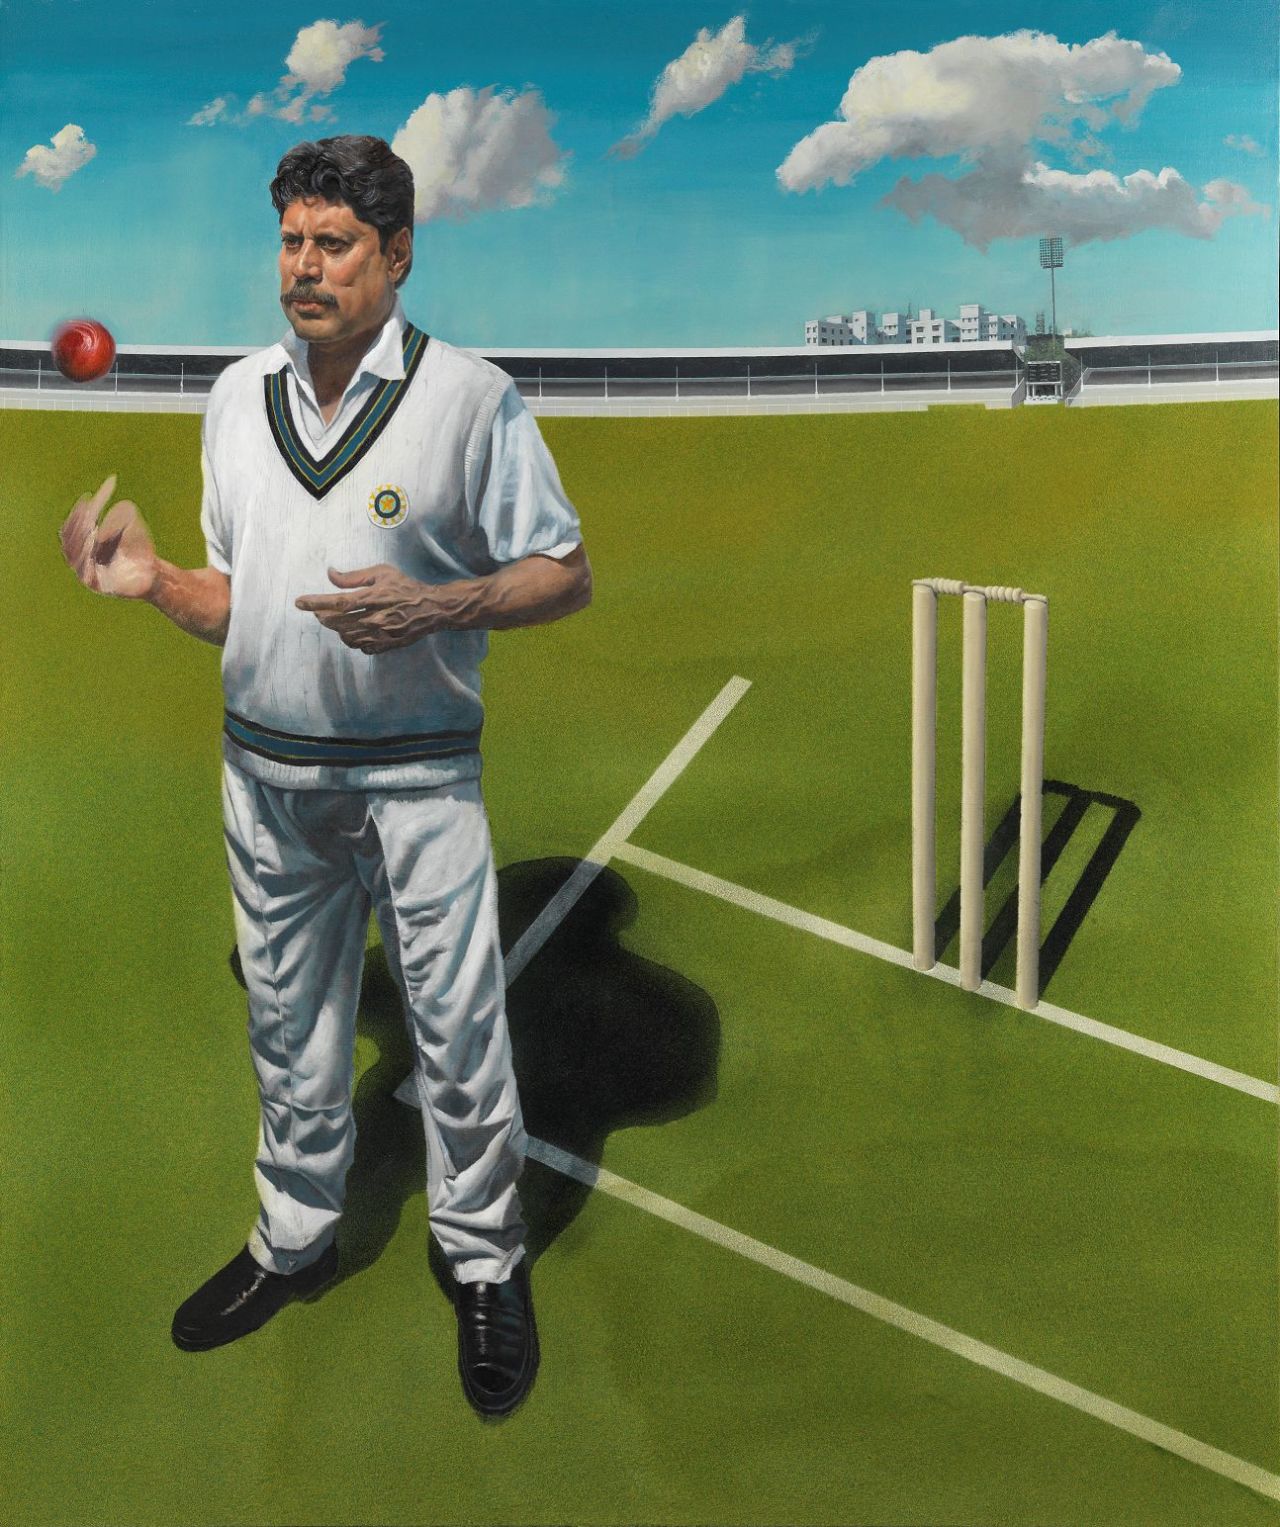 Kapil Dev's portrait, on display at Lord's Cricket Ground, London, 2008